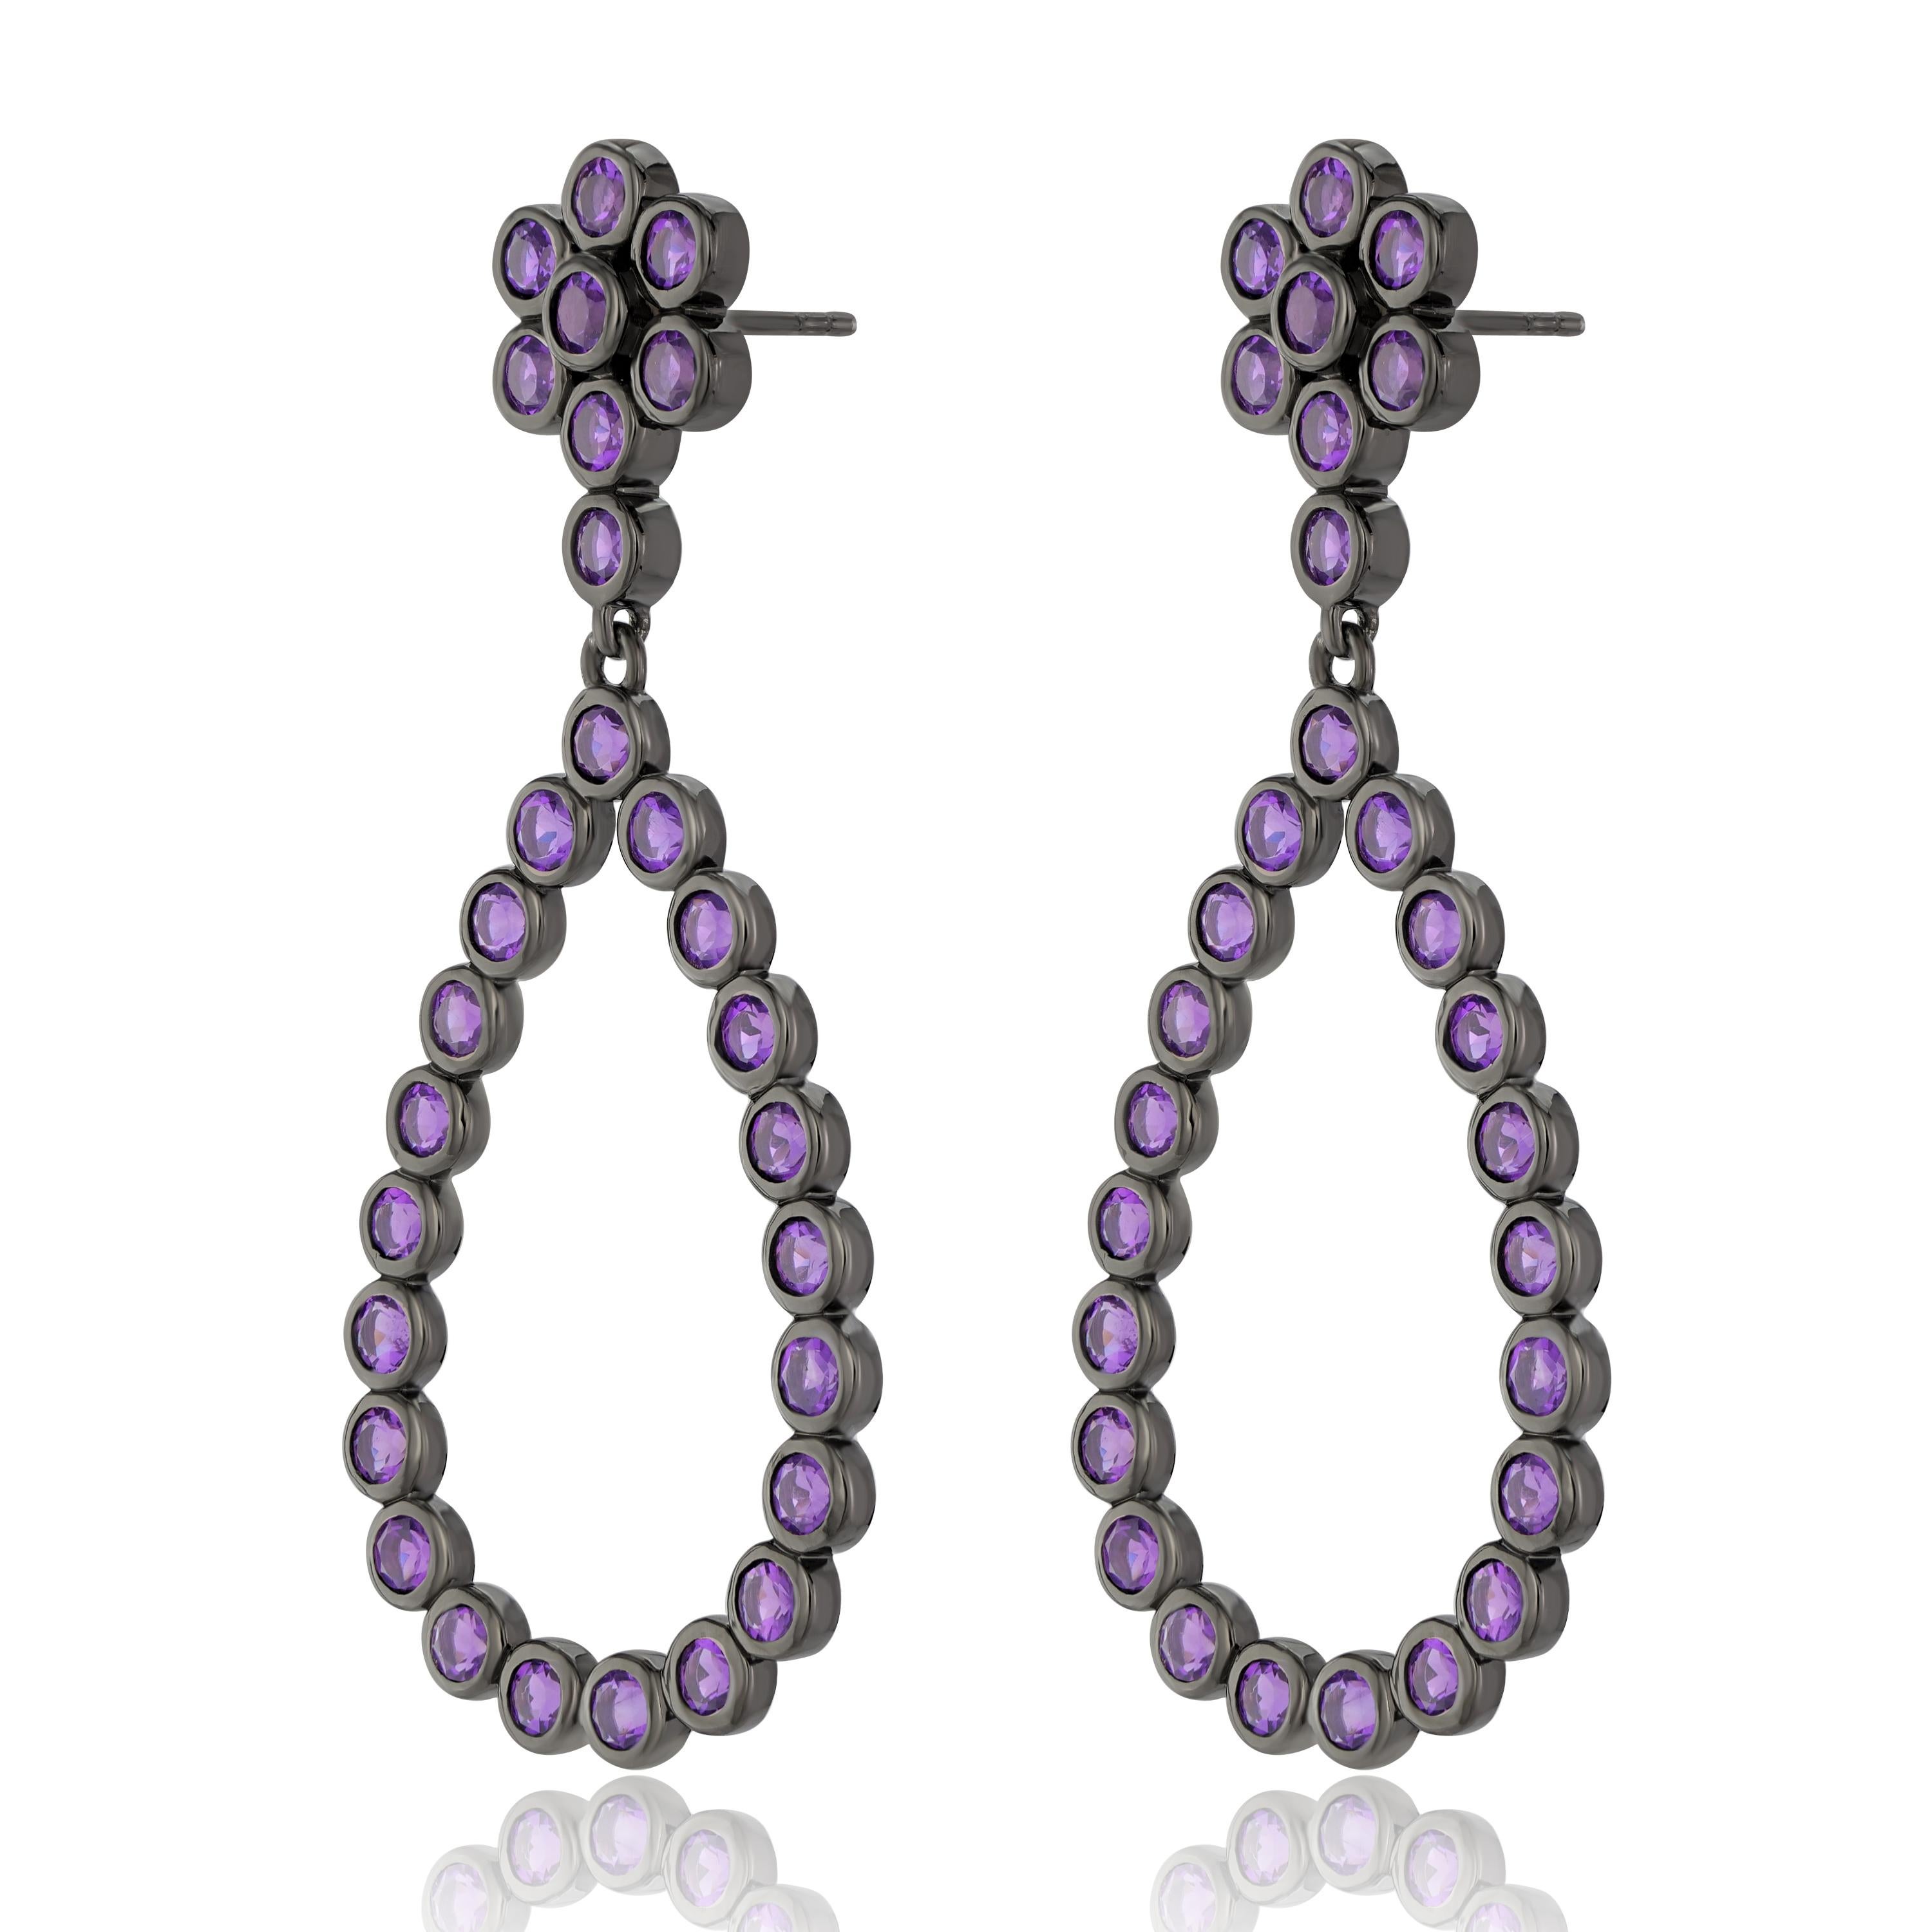 Known to be the birthstone for the month of February, amethyst helps the wearer for a balanced mindset. These women's earrings feature 3 mm amethyst 6.38Ct arranged in a floral and open teardrop design. These earrings are crafted in genuine and